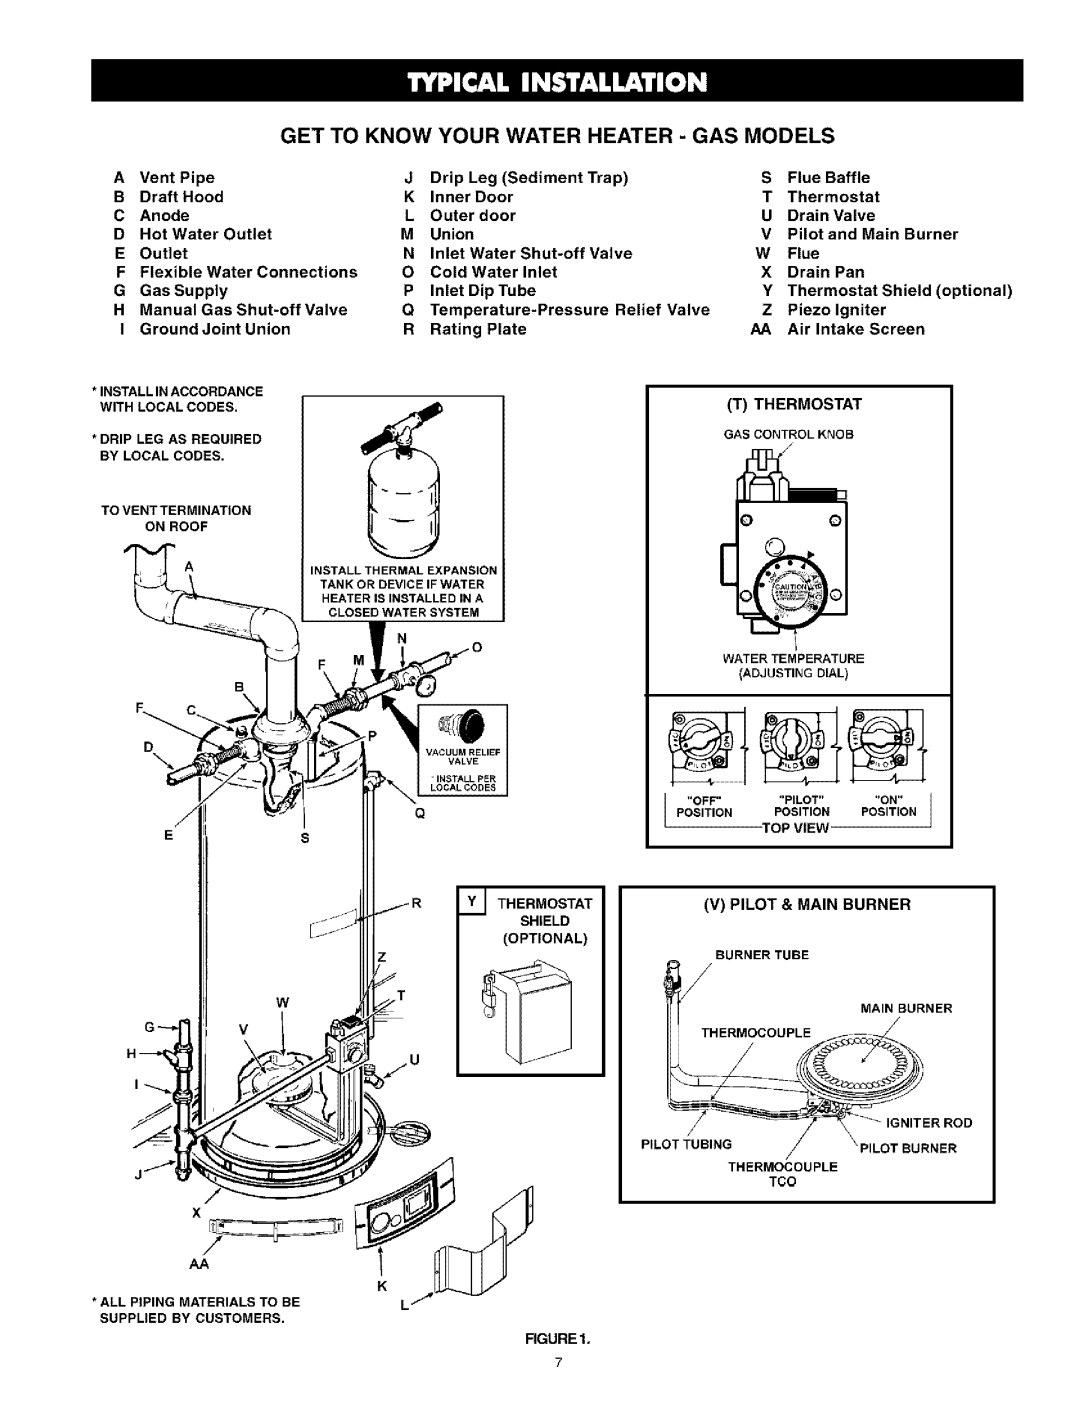 Kenmore 153.336161 Get To Know Your Water Heater - Gas Models, Vent, Pipe, Drip Leg Sediment, Trap, Flue Baffle, Draft 